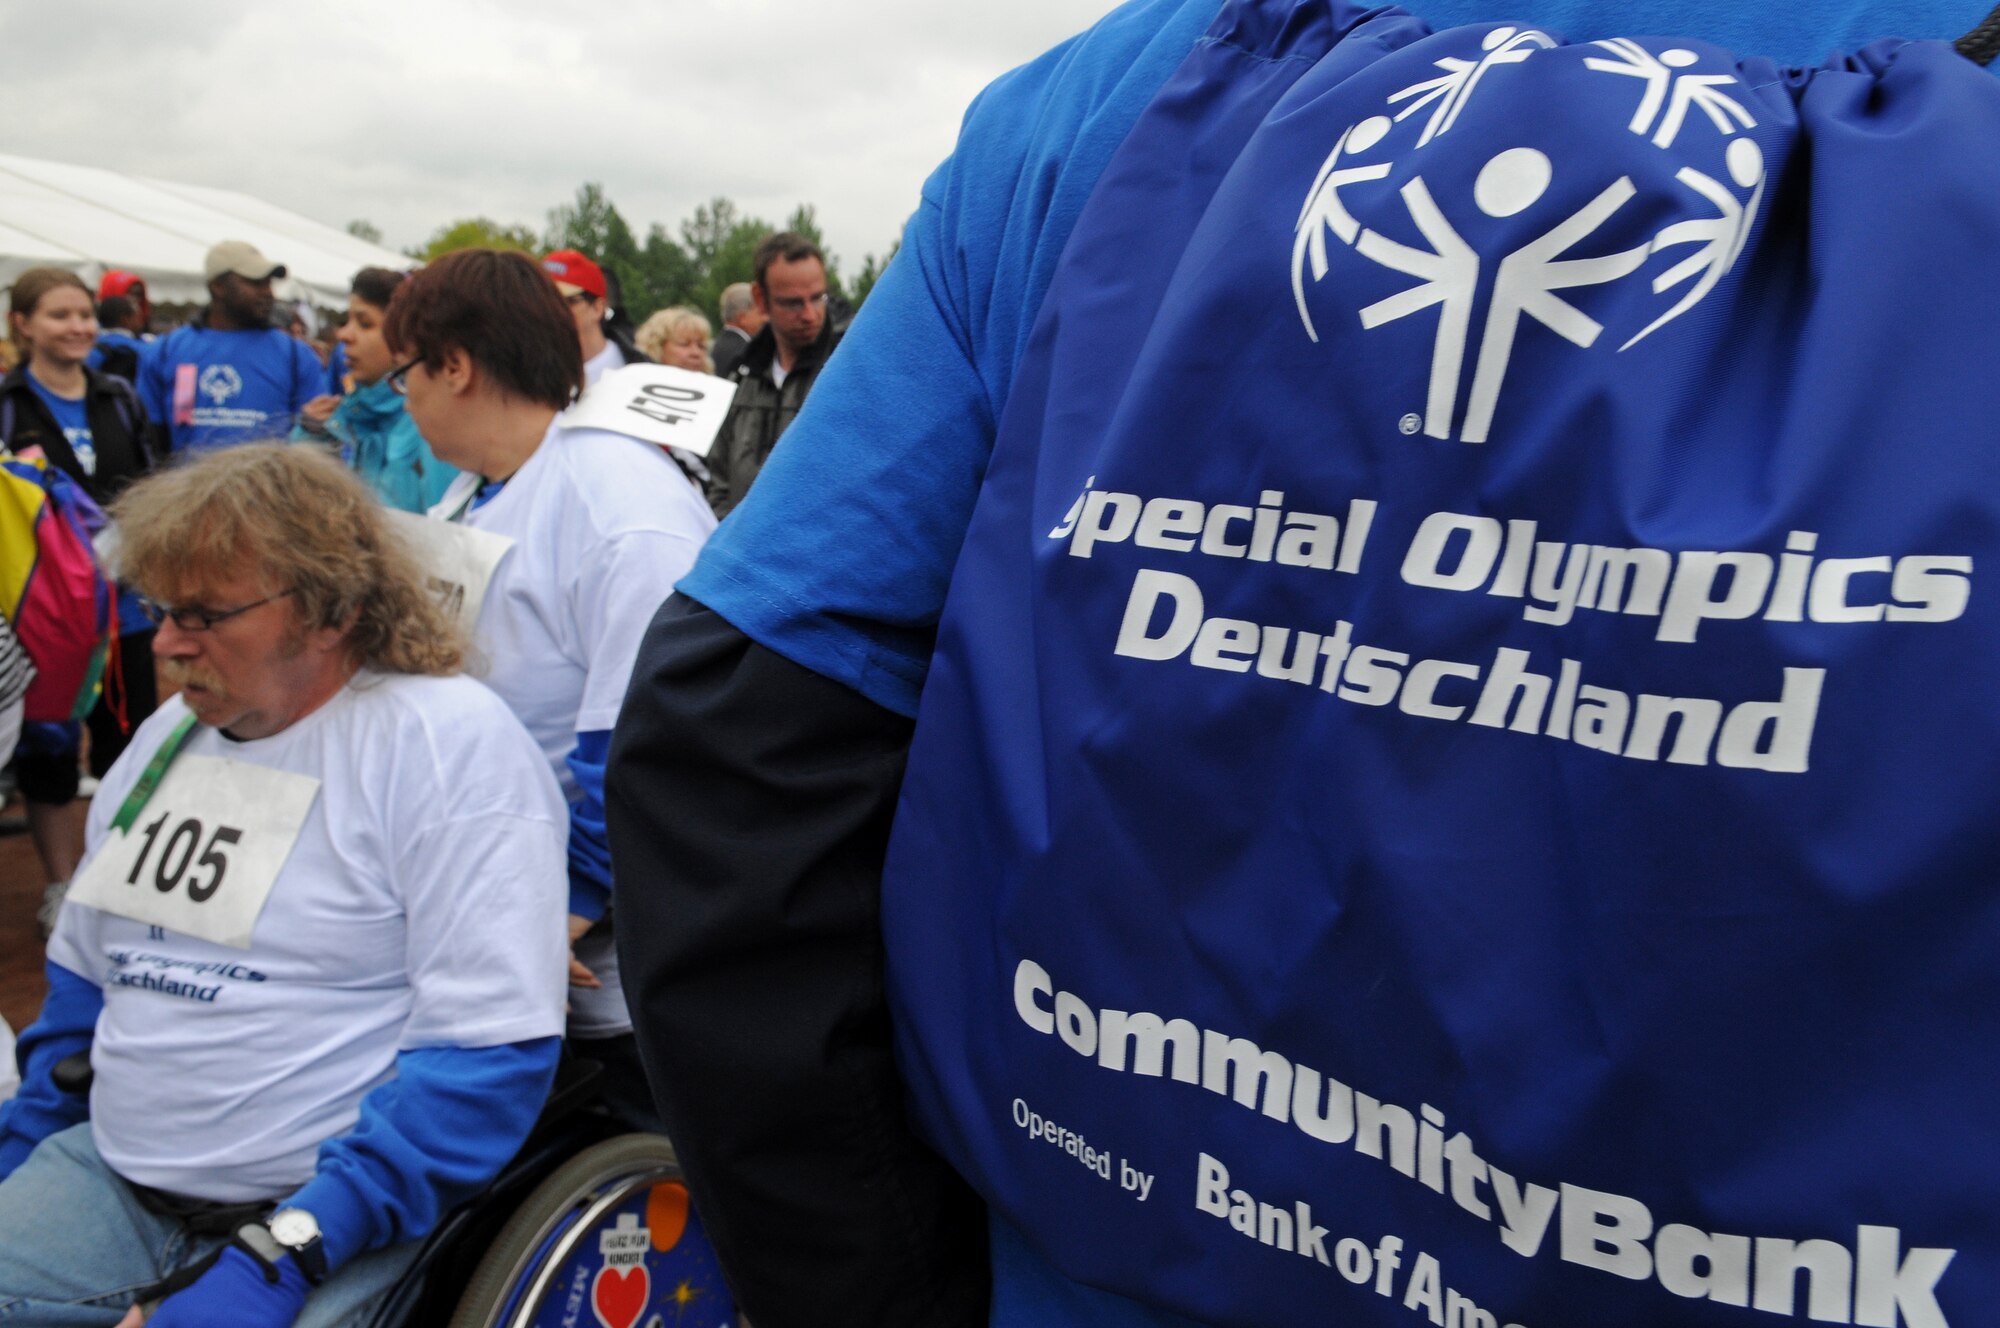 Athletes and their buddies arrive to the 36th Annual Special Olympics held in Enkenbach-Alsenborn, Germany, May 6, 2009. Special Olympics is an international program of year-round sports training and athletic competition for more than 1.7 million children and adults with disabilities in more than 150 countries including Germany. (U.S. Air Force photo by Airman 1st Class Grovert Fuentes-Contreras)